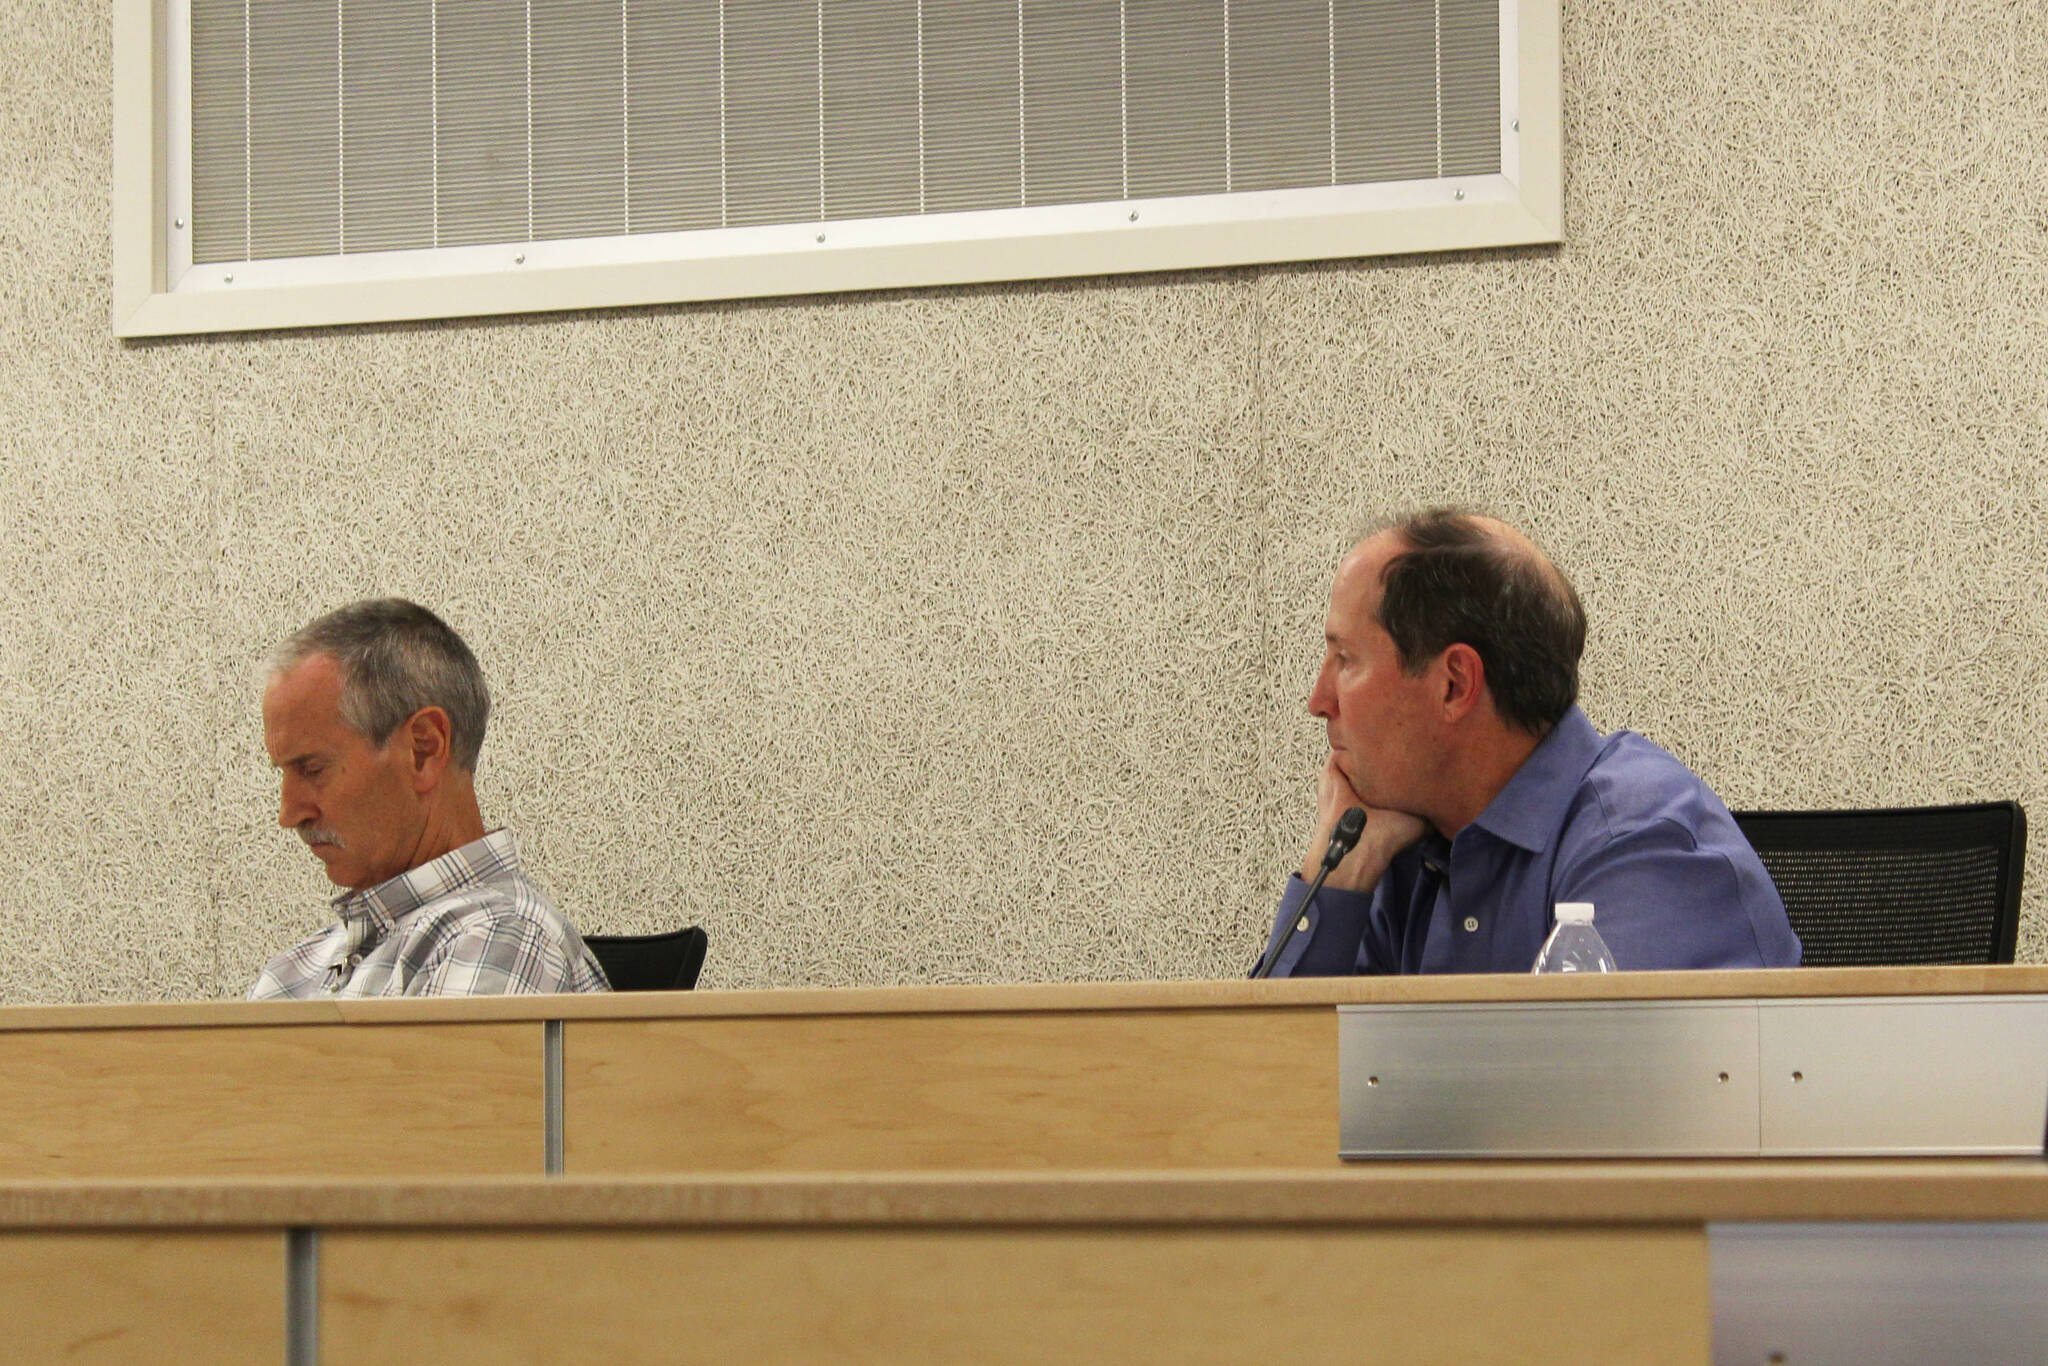 Kenai Peninsula Borough Mayor Mike Navarre (right) and Chief of Staff Max Best (left) participate in an assembly meeting on Tuesday, Oct. 11, 2022 in Soldotna, Alaska. The meeting was Navarre’s first as mayor since being appointed last month. (Ashlyn O’Hara/Peninsula Clarion)